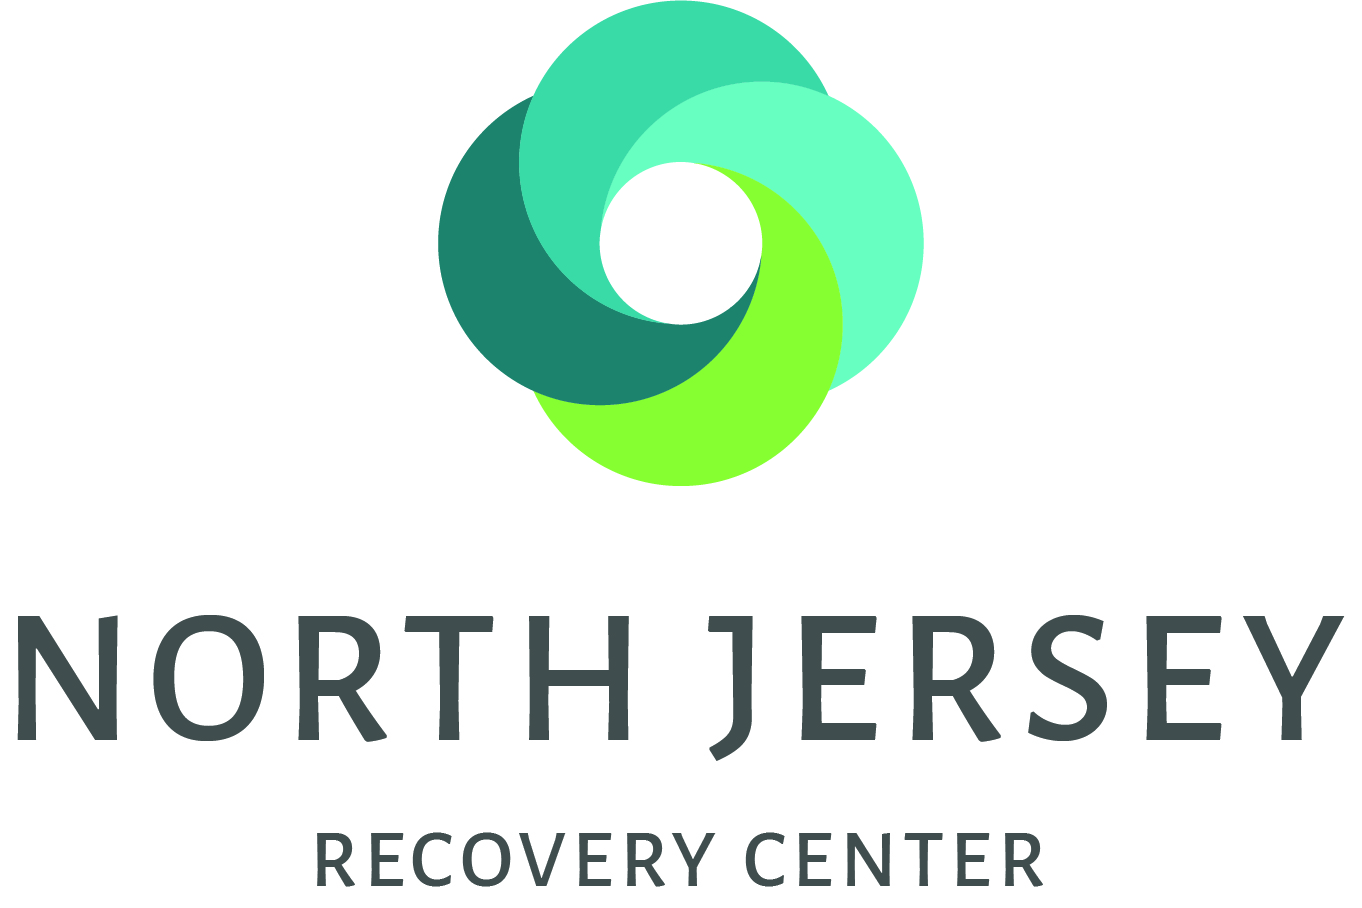 Speedball Abuse and Recovery - Get Help Today - North Jersey Recovery Center